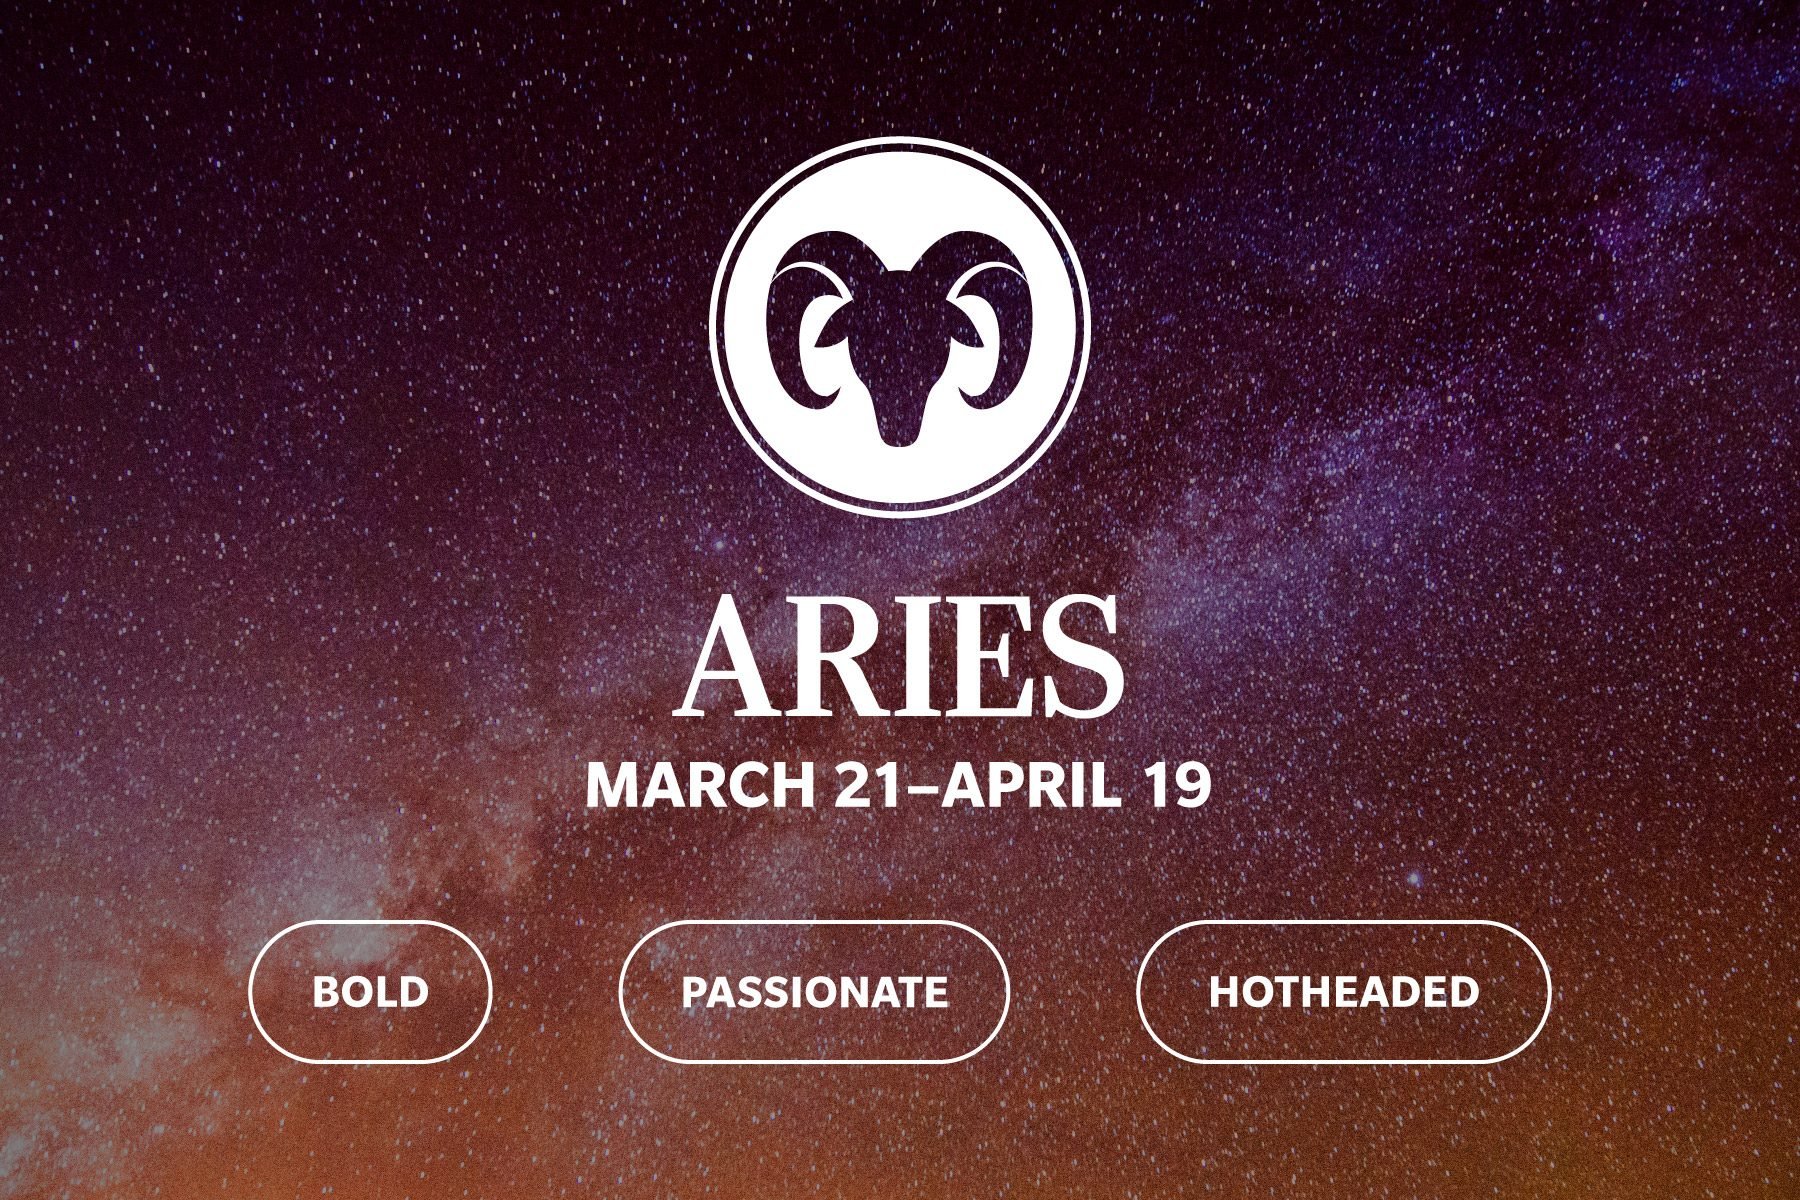 Zodiac sign qualities on galaxy background Aries